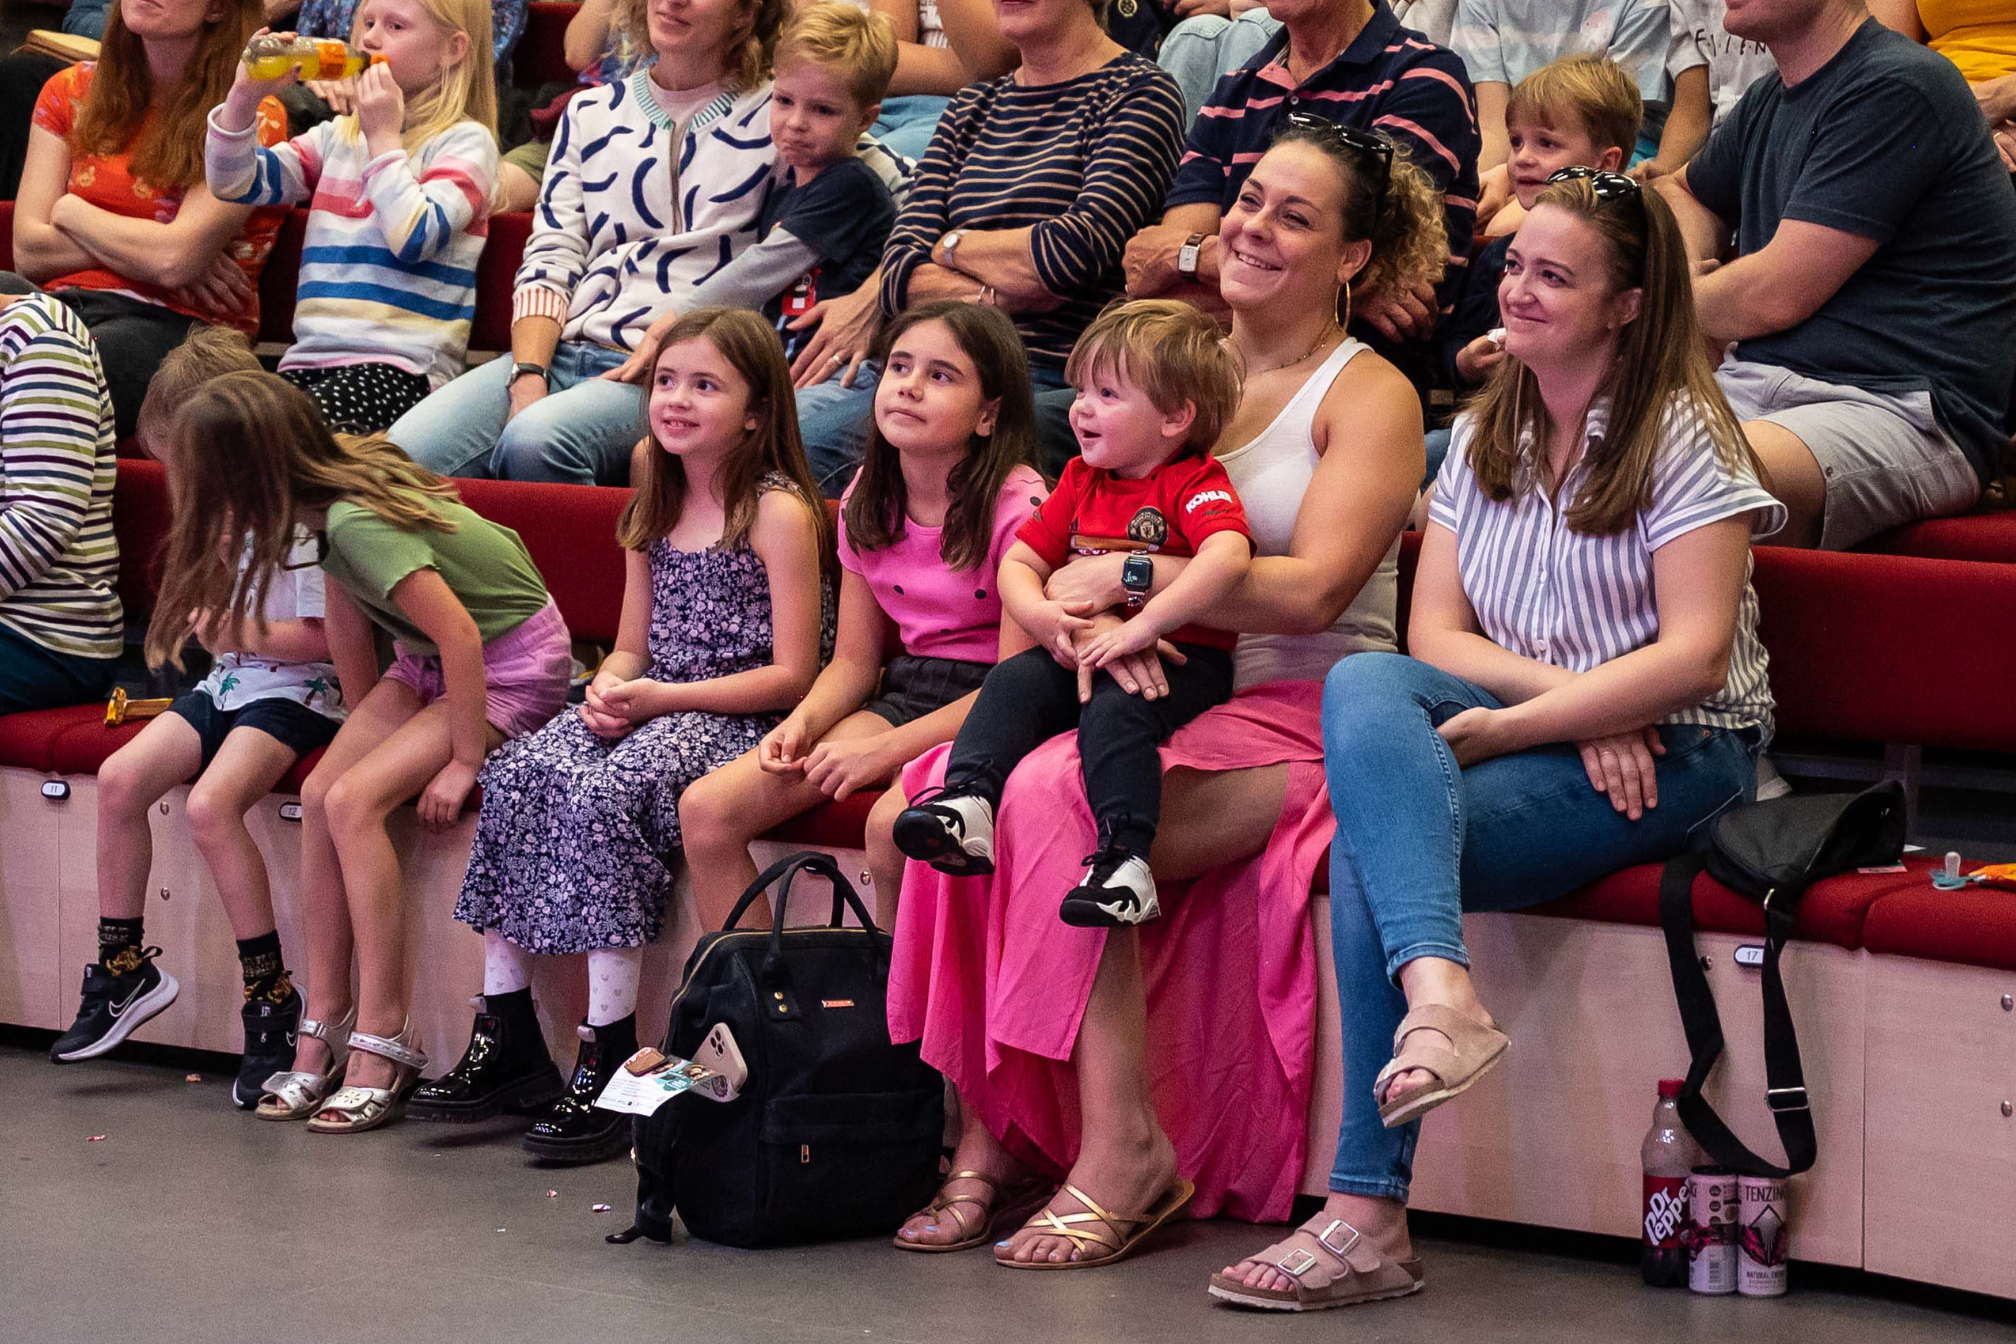 Audience members sat in the front row smiling. There is a selection of adults and children.